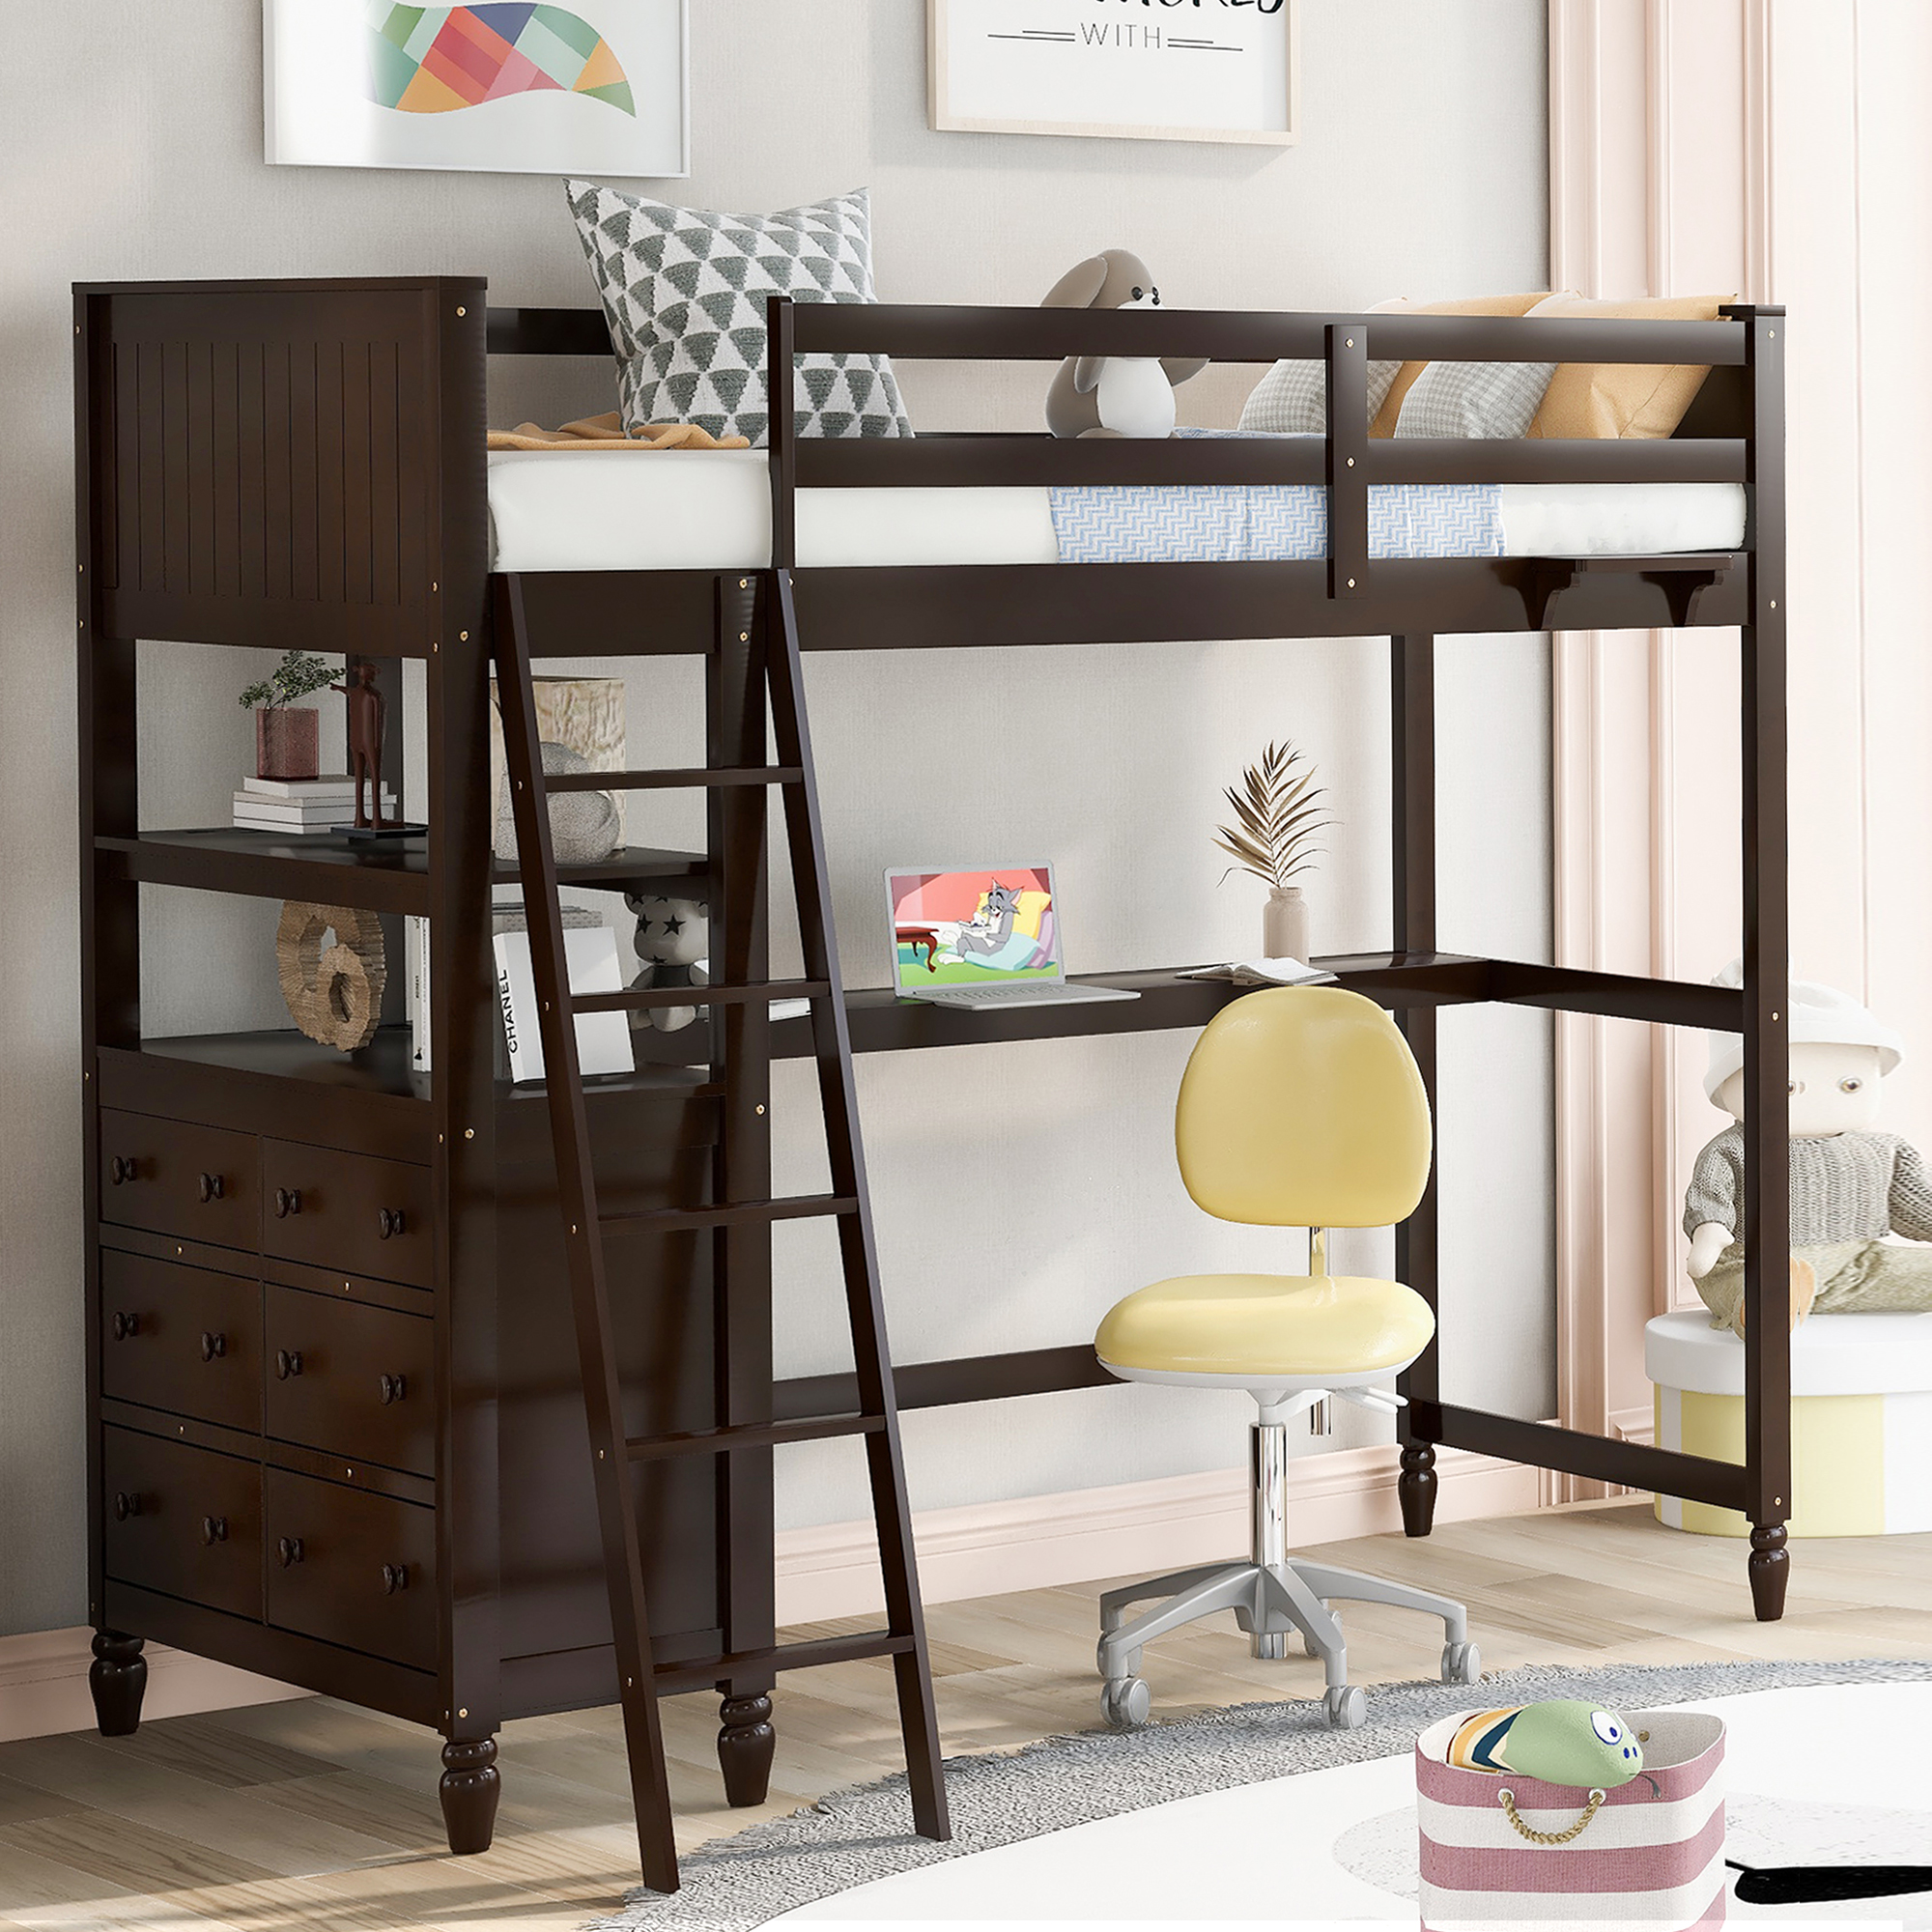 Twin size Loft Bed with Drawers and Desk, Wooden Loft Bed with Shelves - Espresso-Boyel Living